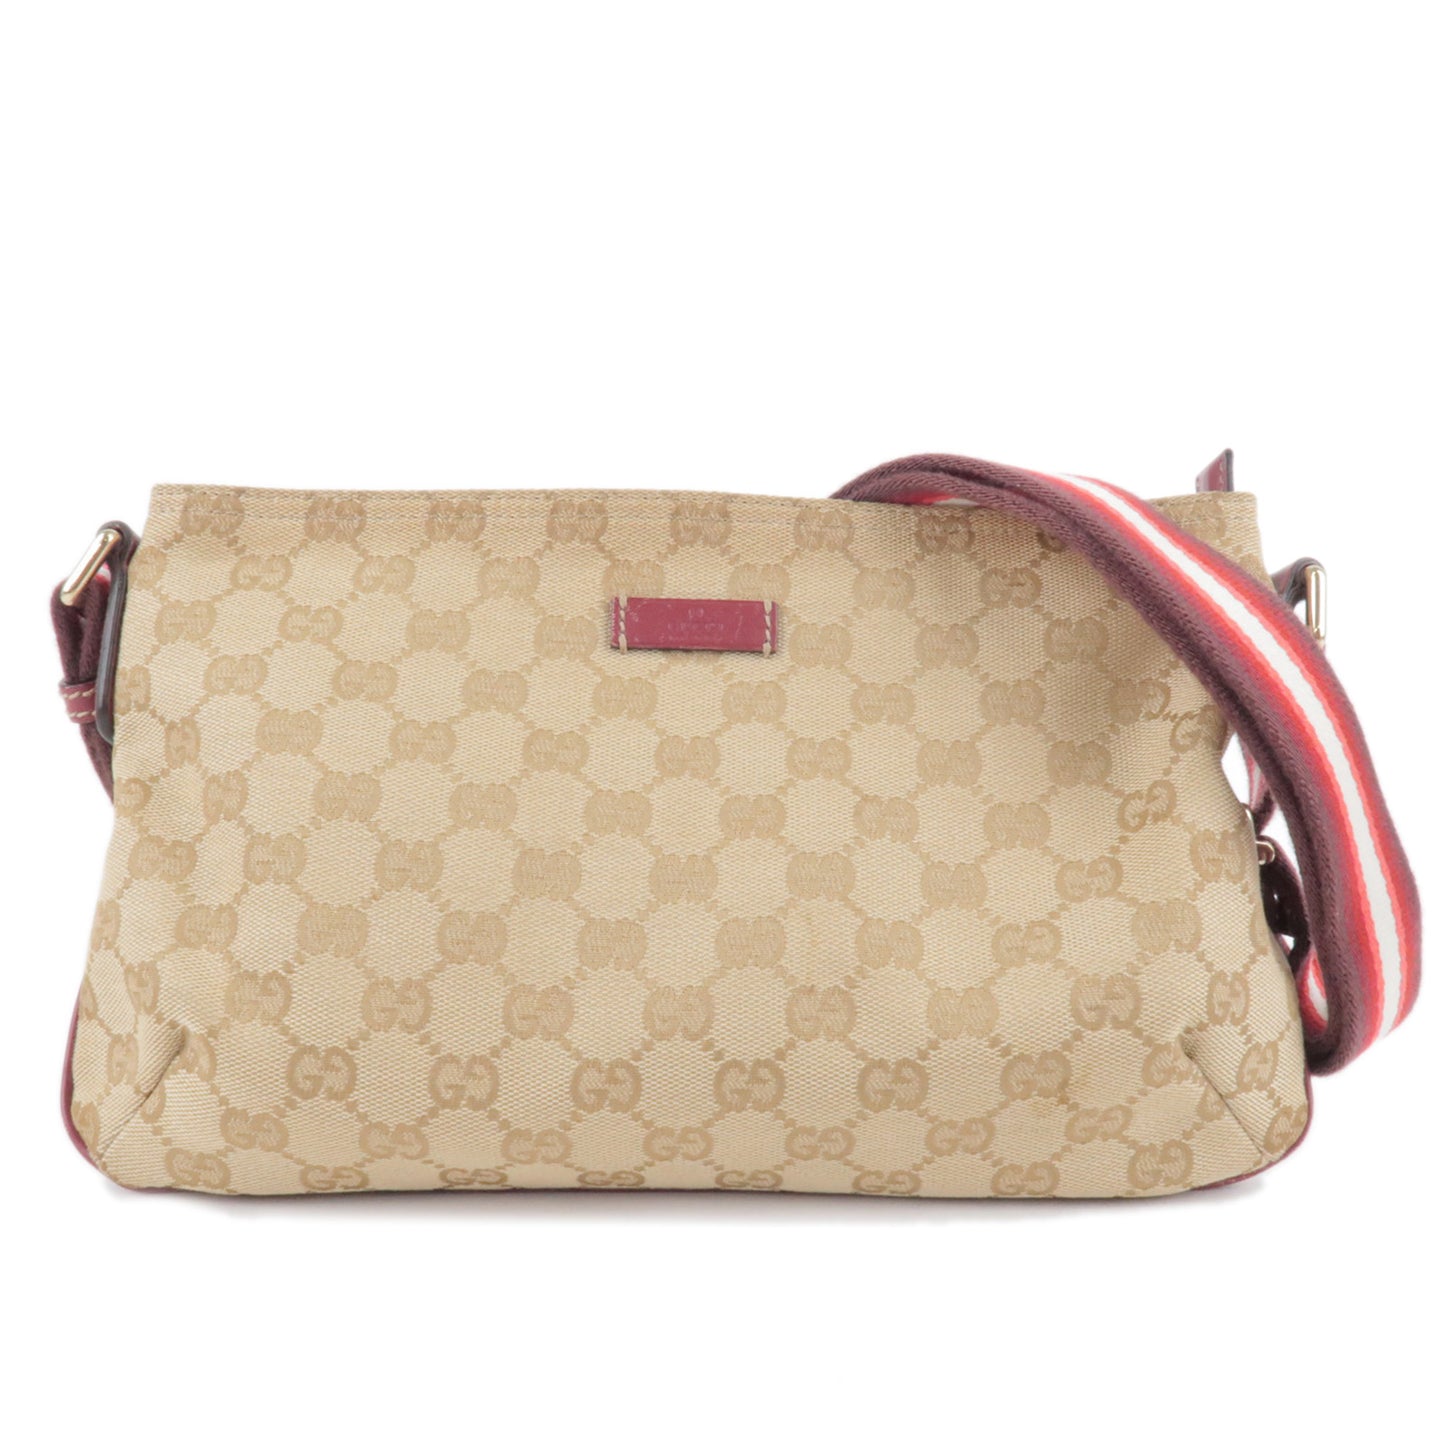 GUCCI-Sherry-GG-Canvas-Leather-Shoulder-Bag-Beige-Red-189749